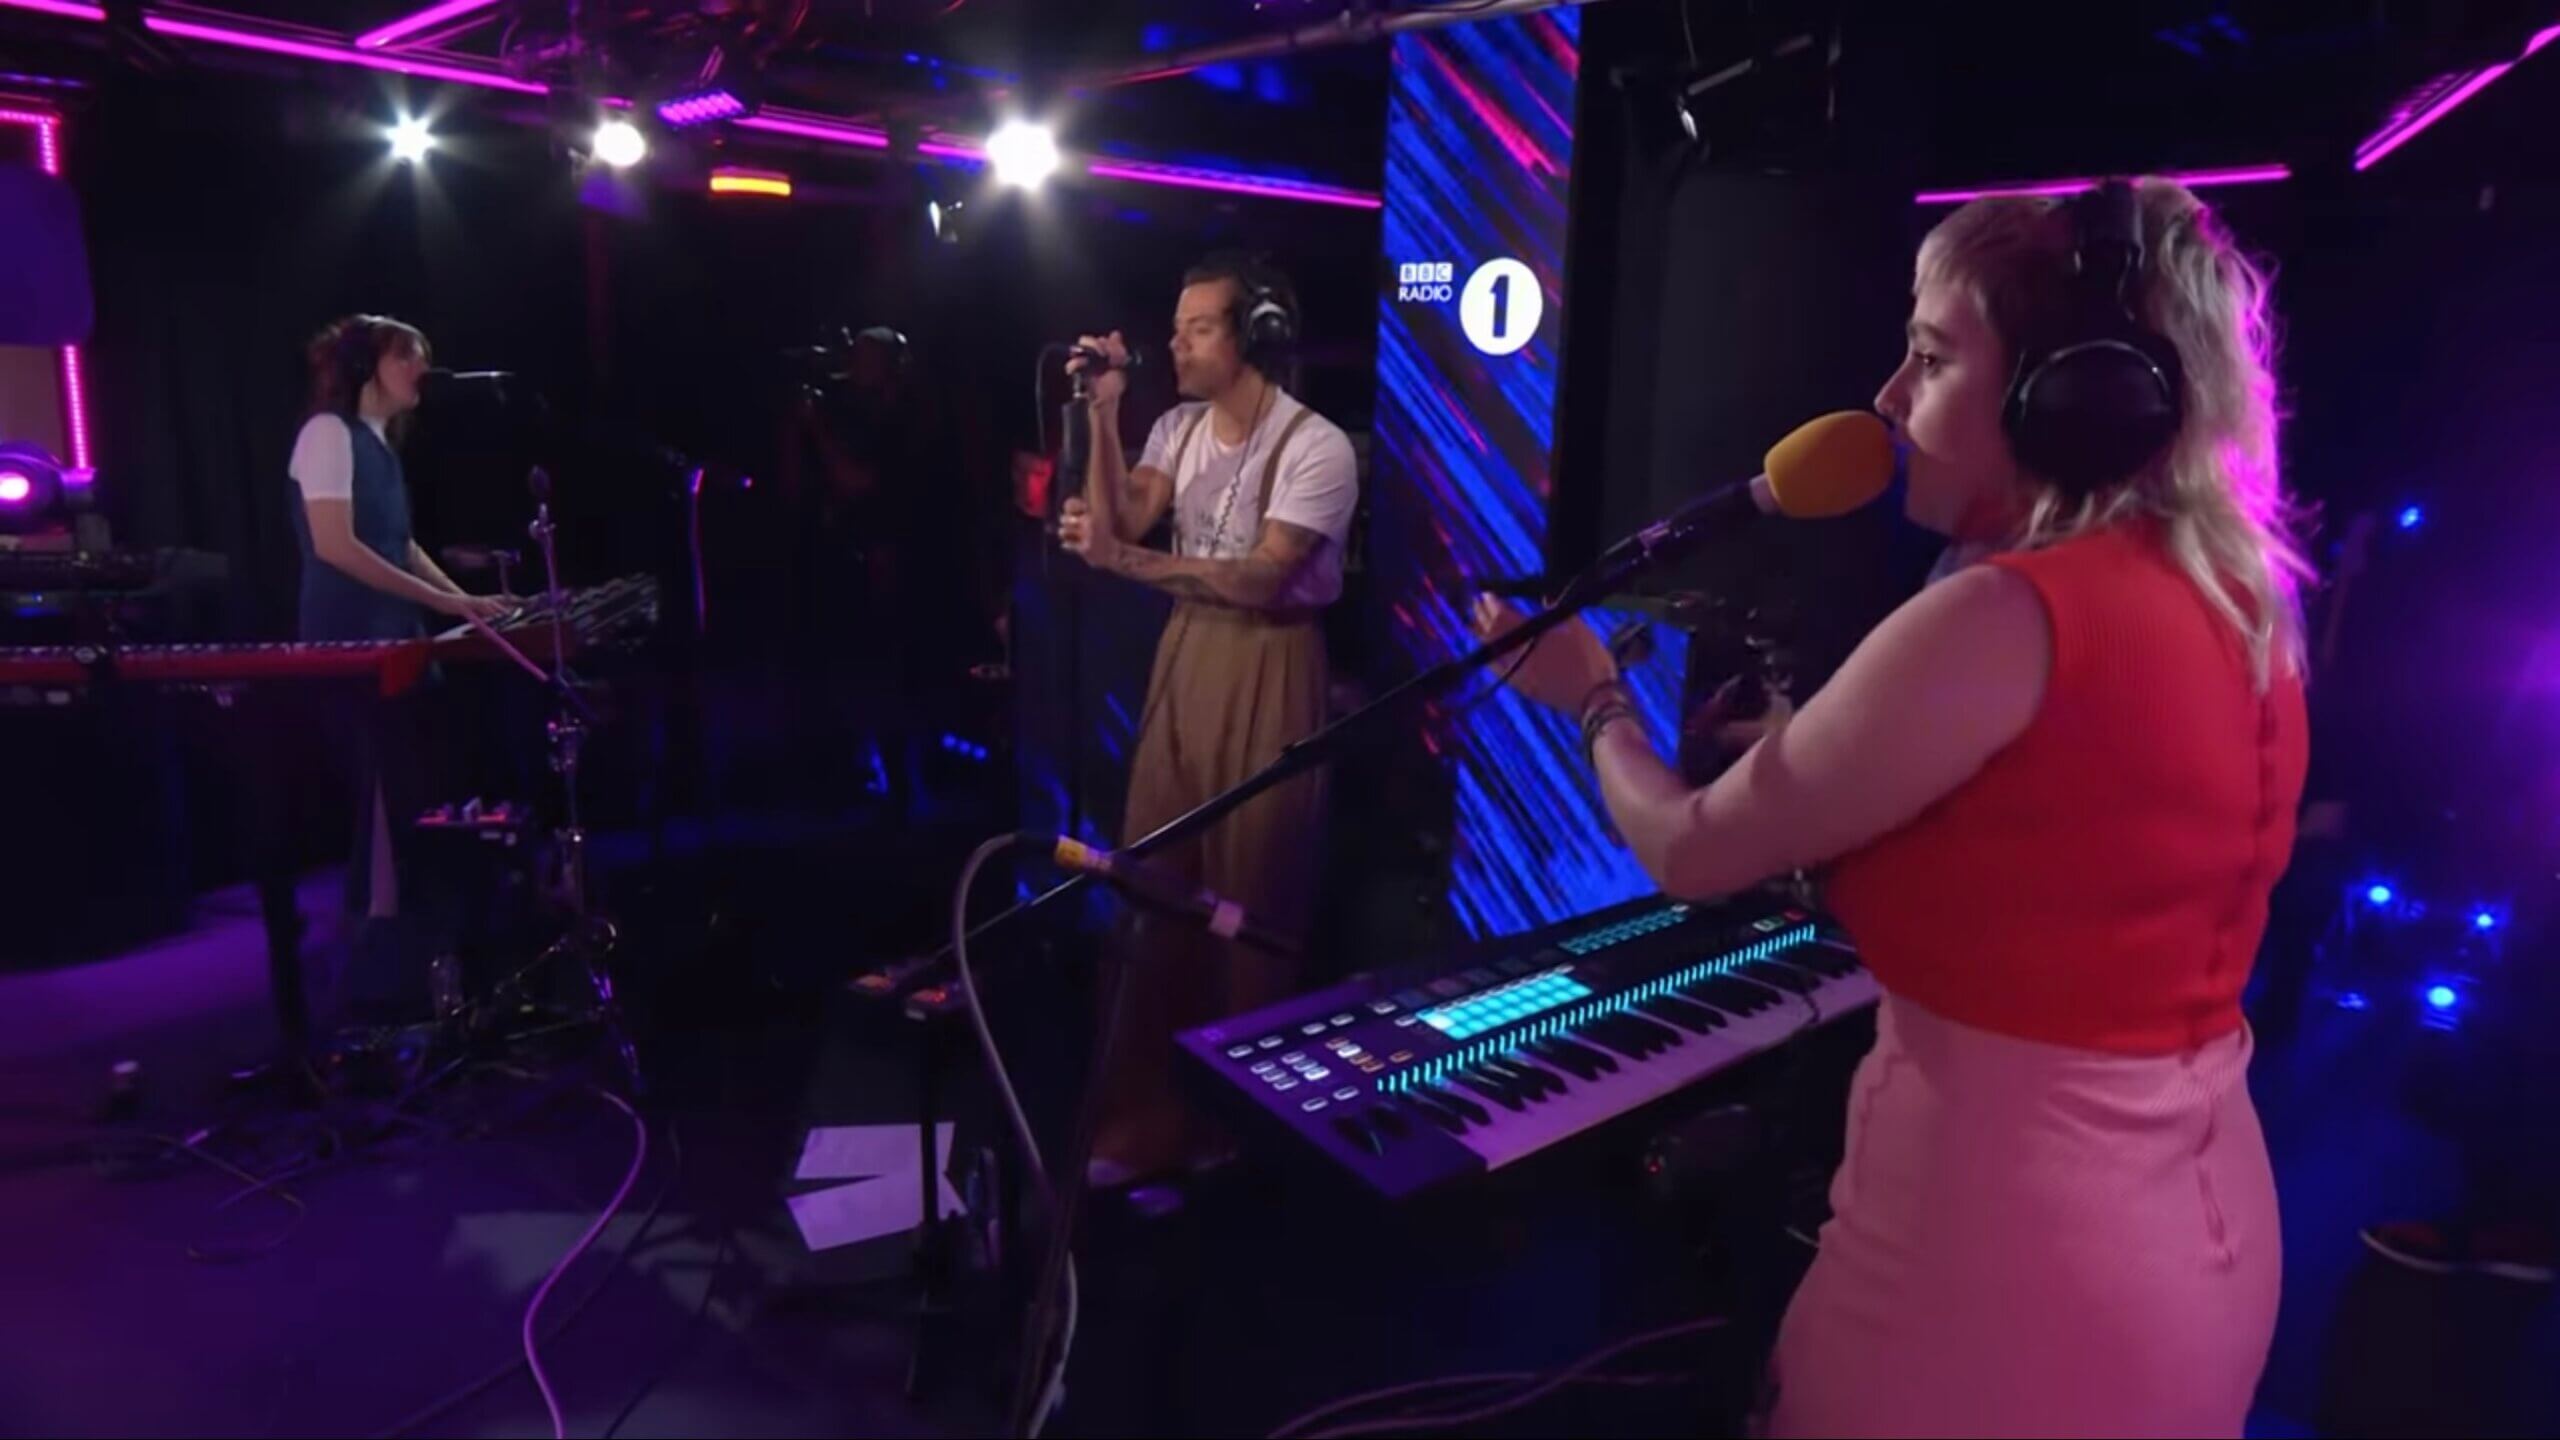 Harry Styles - Adore You - In the Live Lounge 3